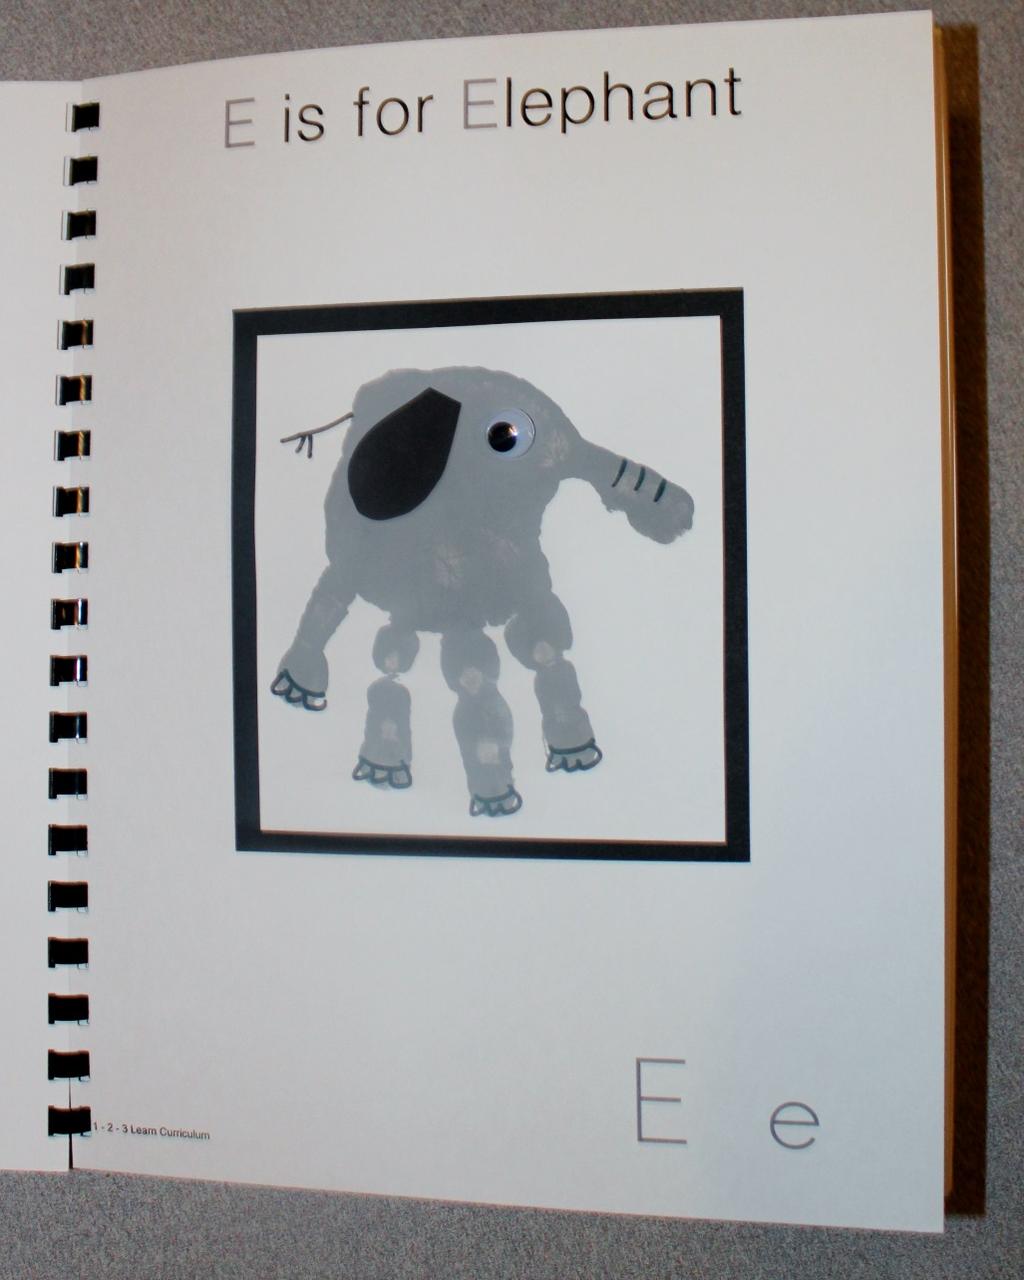 E is for Elephant Paint the child s hand gray. (Mix a small amount to black to get the color gray you want to use). Place the child s hand on a piece of white card stock.